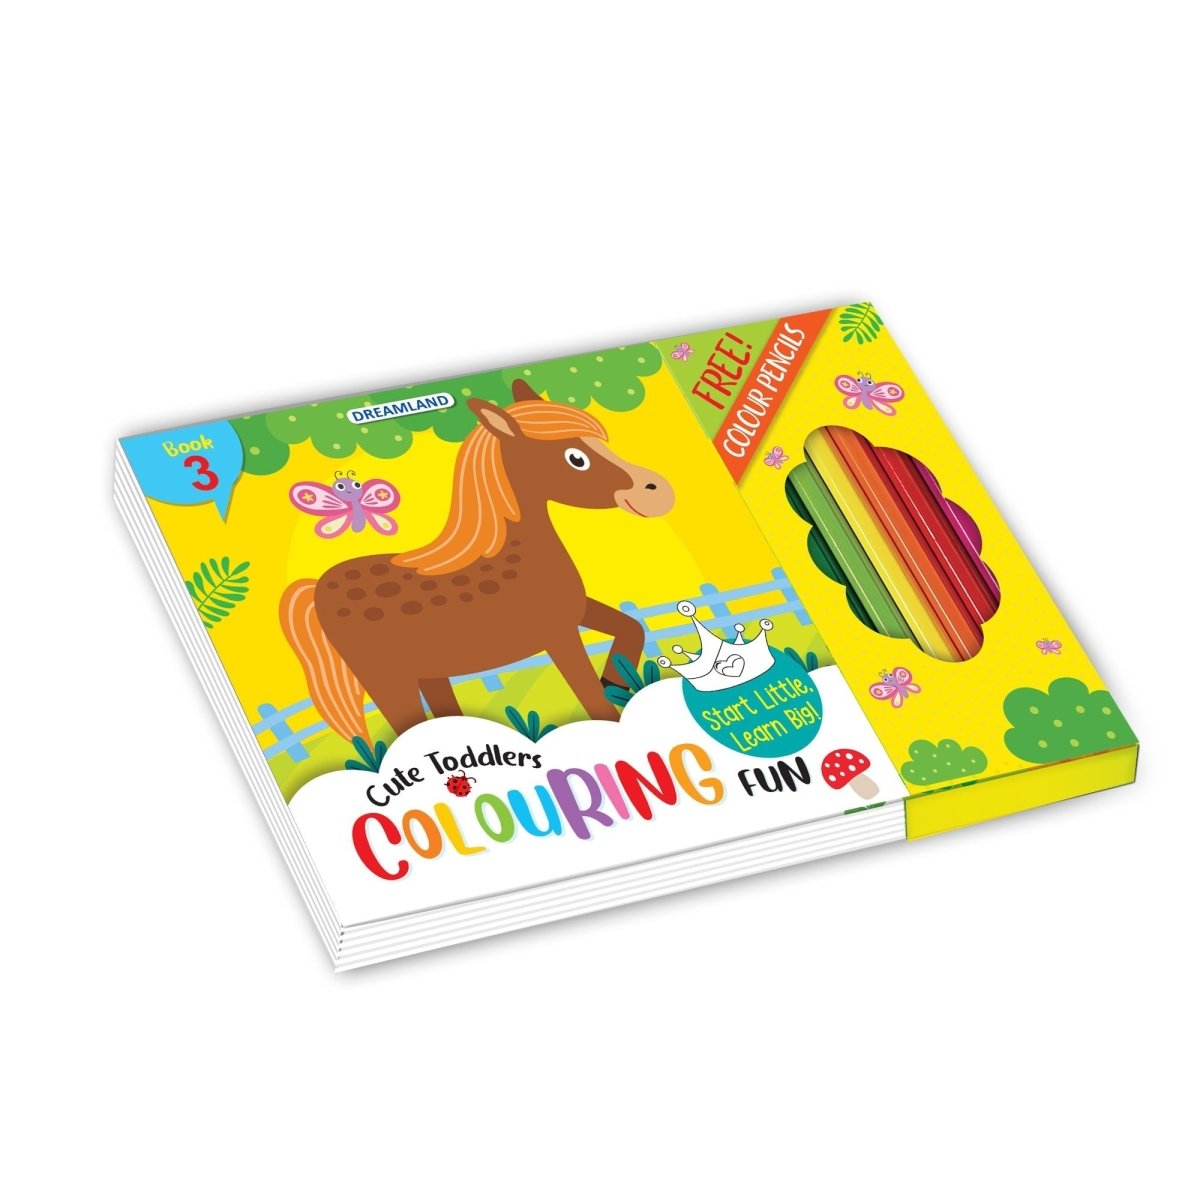 Dreamland Publications Cute Toddlers Fun Colouring Book With 6 Colour Pencils - Book 3 - 9789395406741